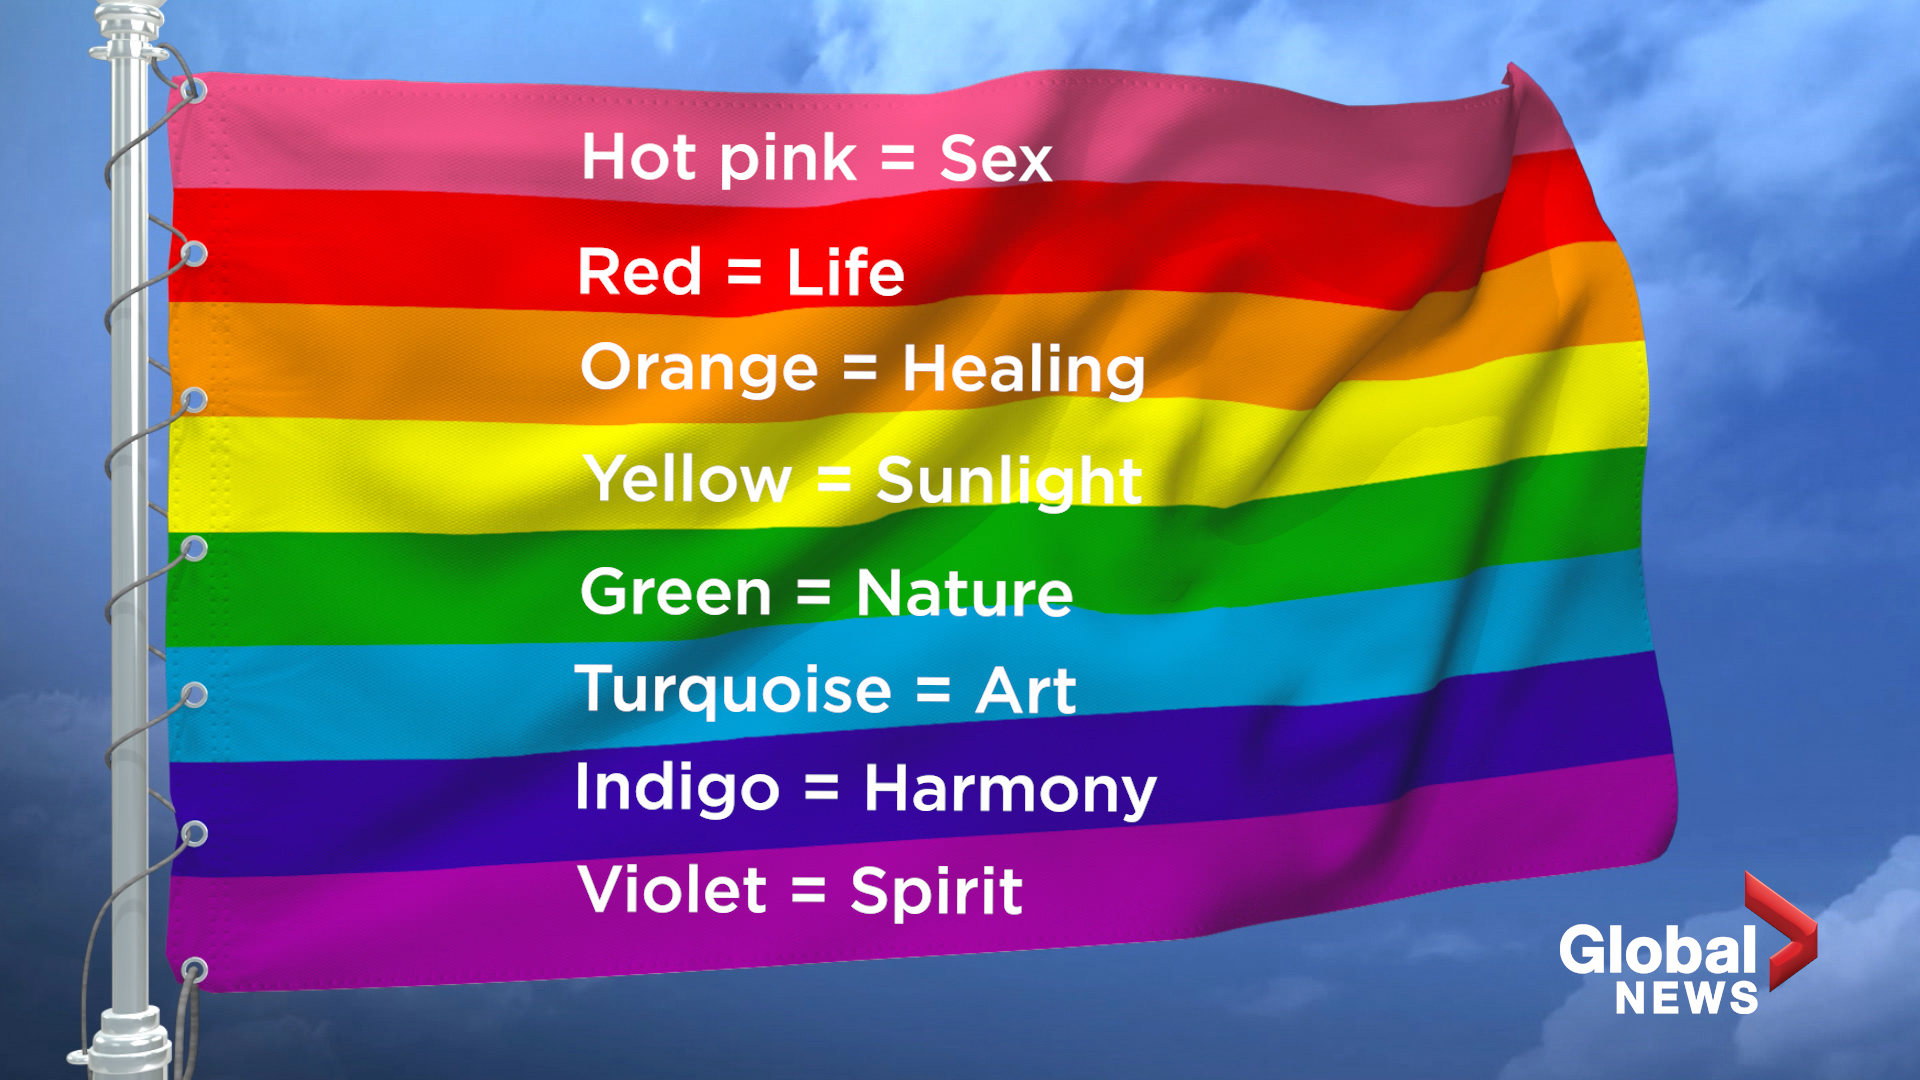 dems gay pride flags and meanings